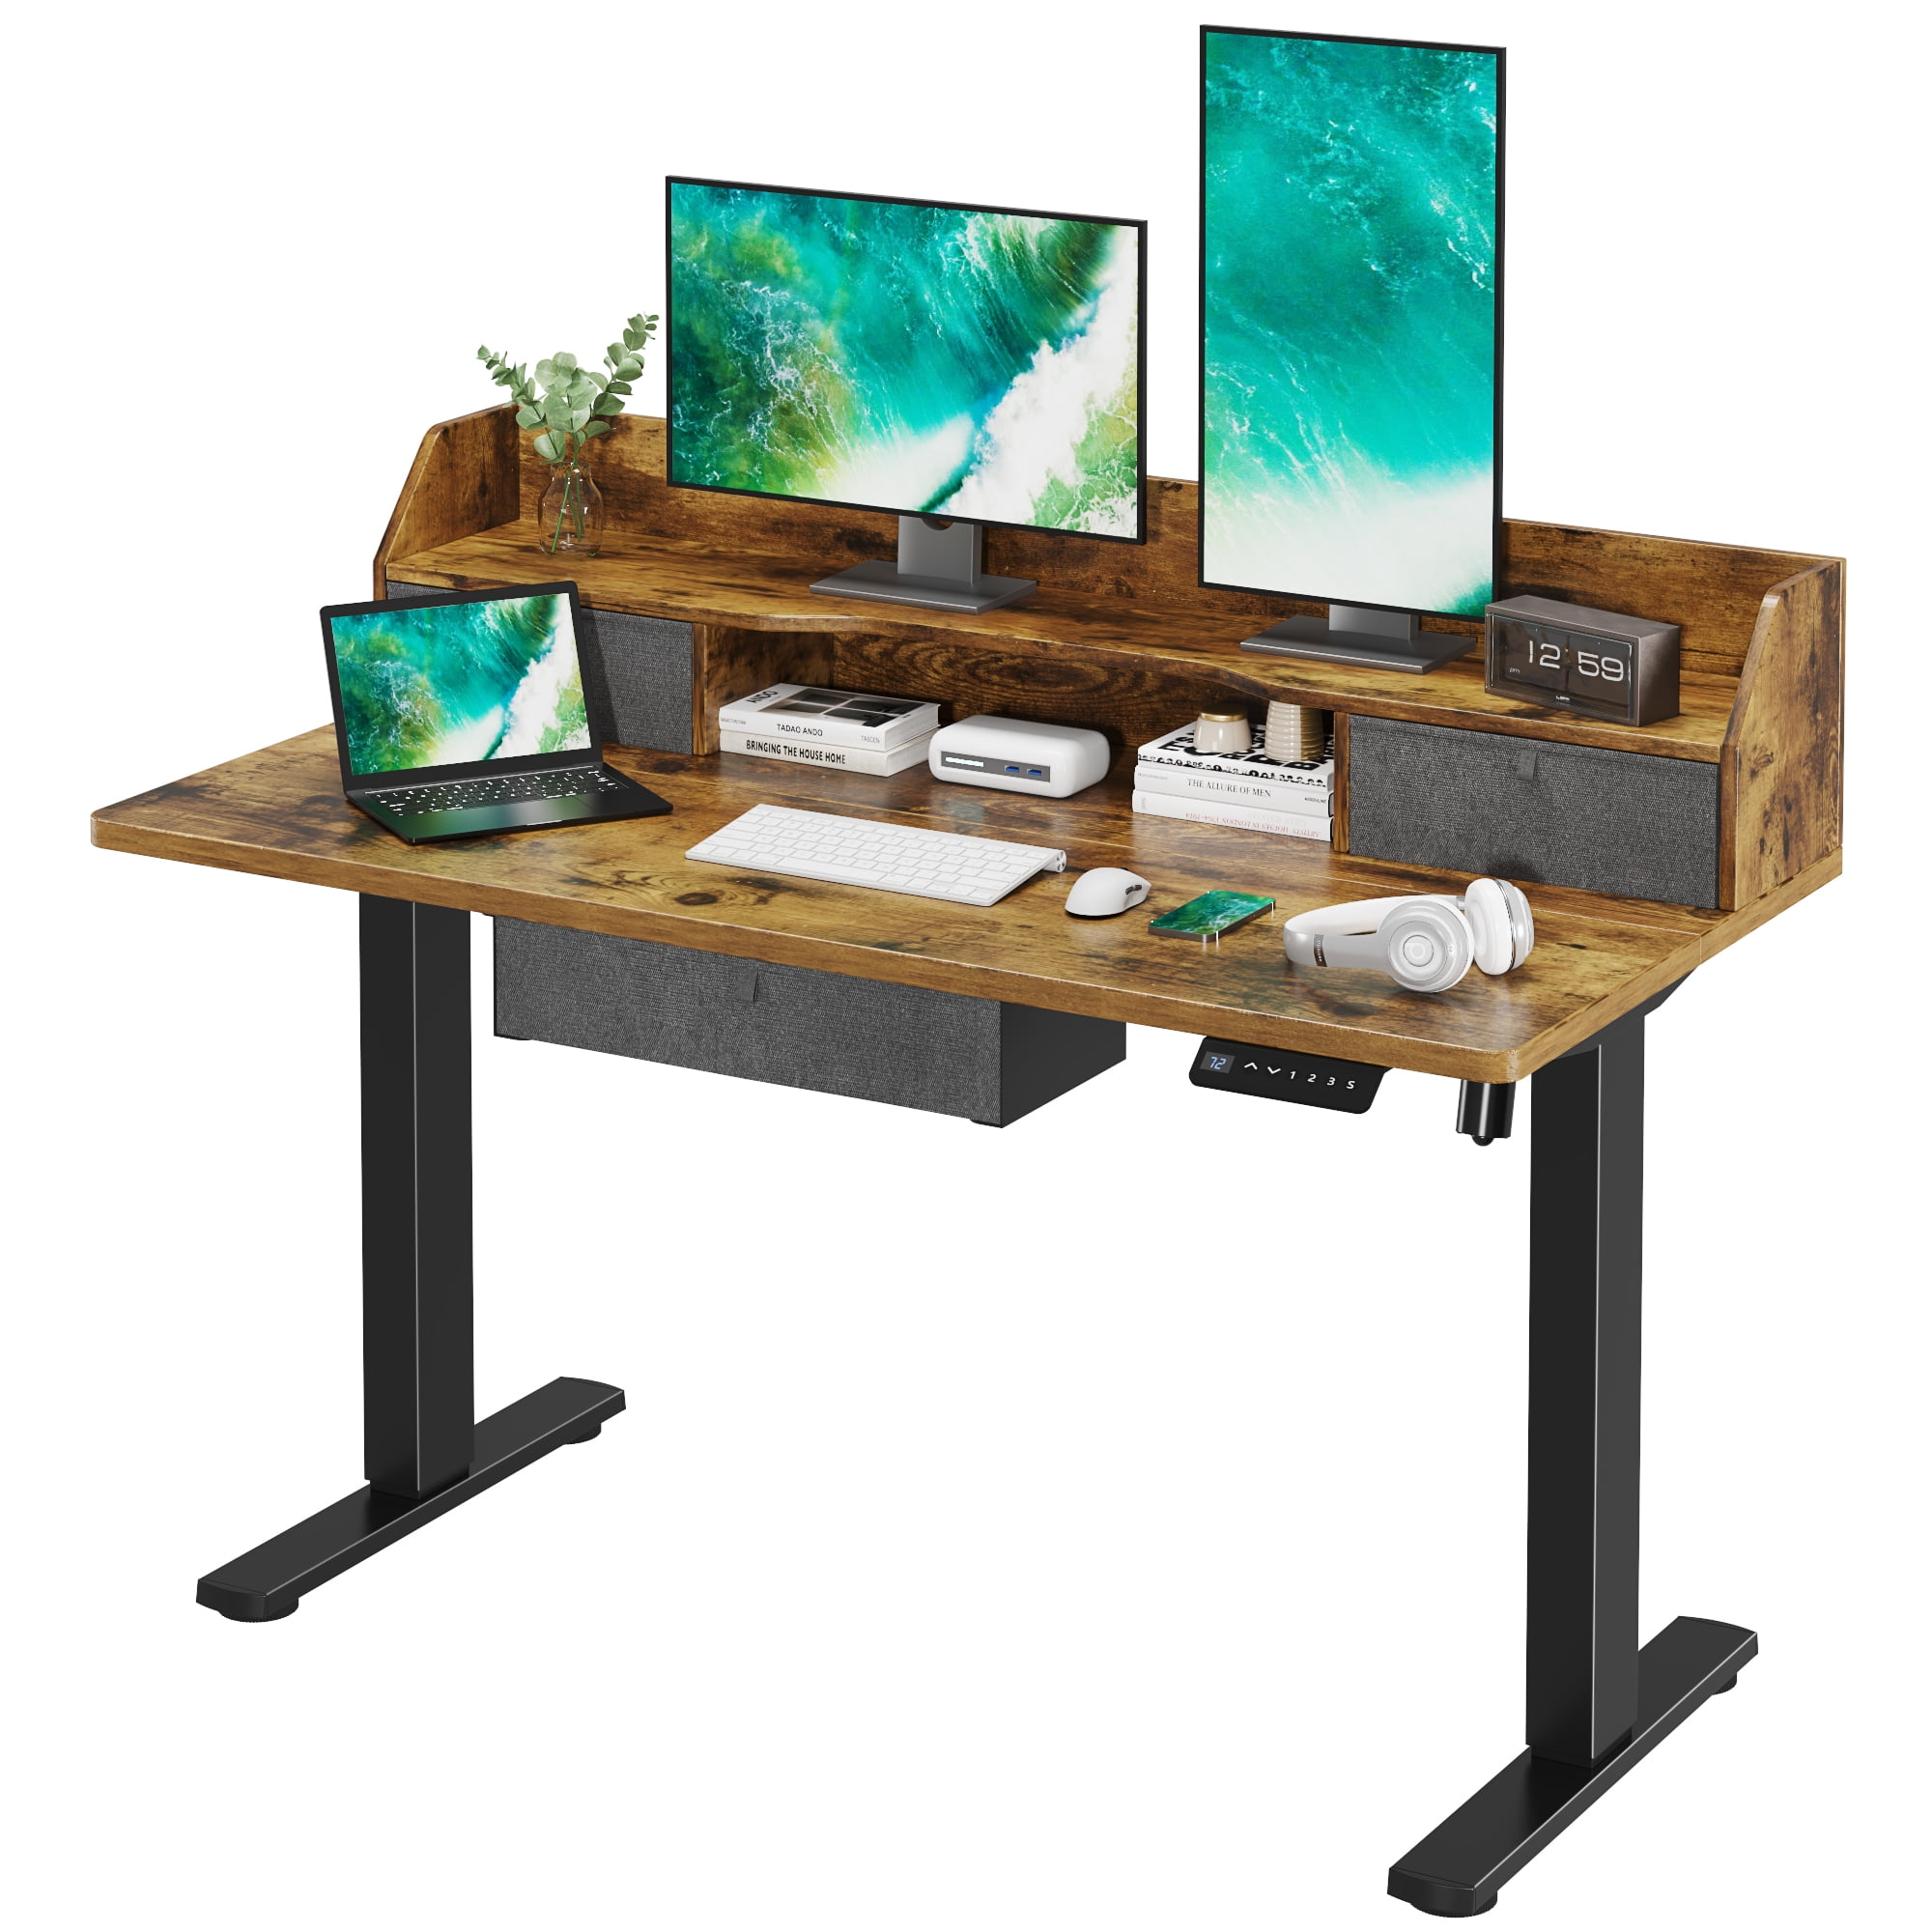 Homall 48 inch 24 inch Electric Height Adjustable Standing Desk Home Office Computer Desk Memory Preset with T-shaped Metal Bracket, Black&Wood, Beige